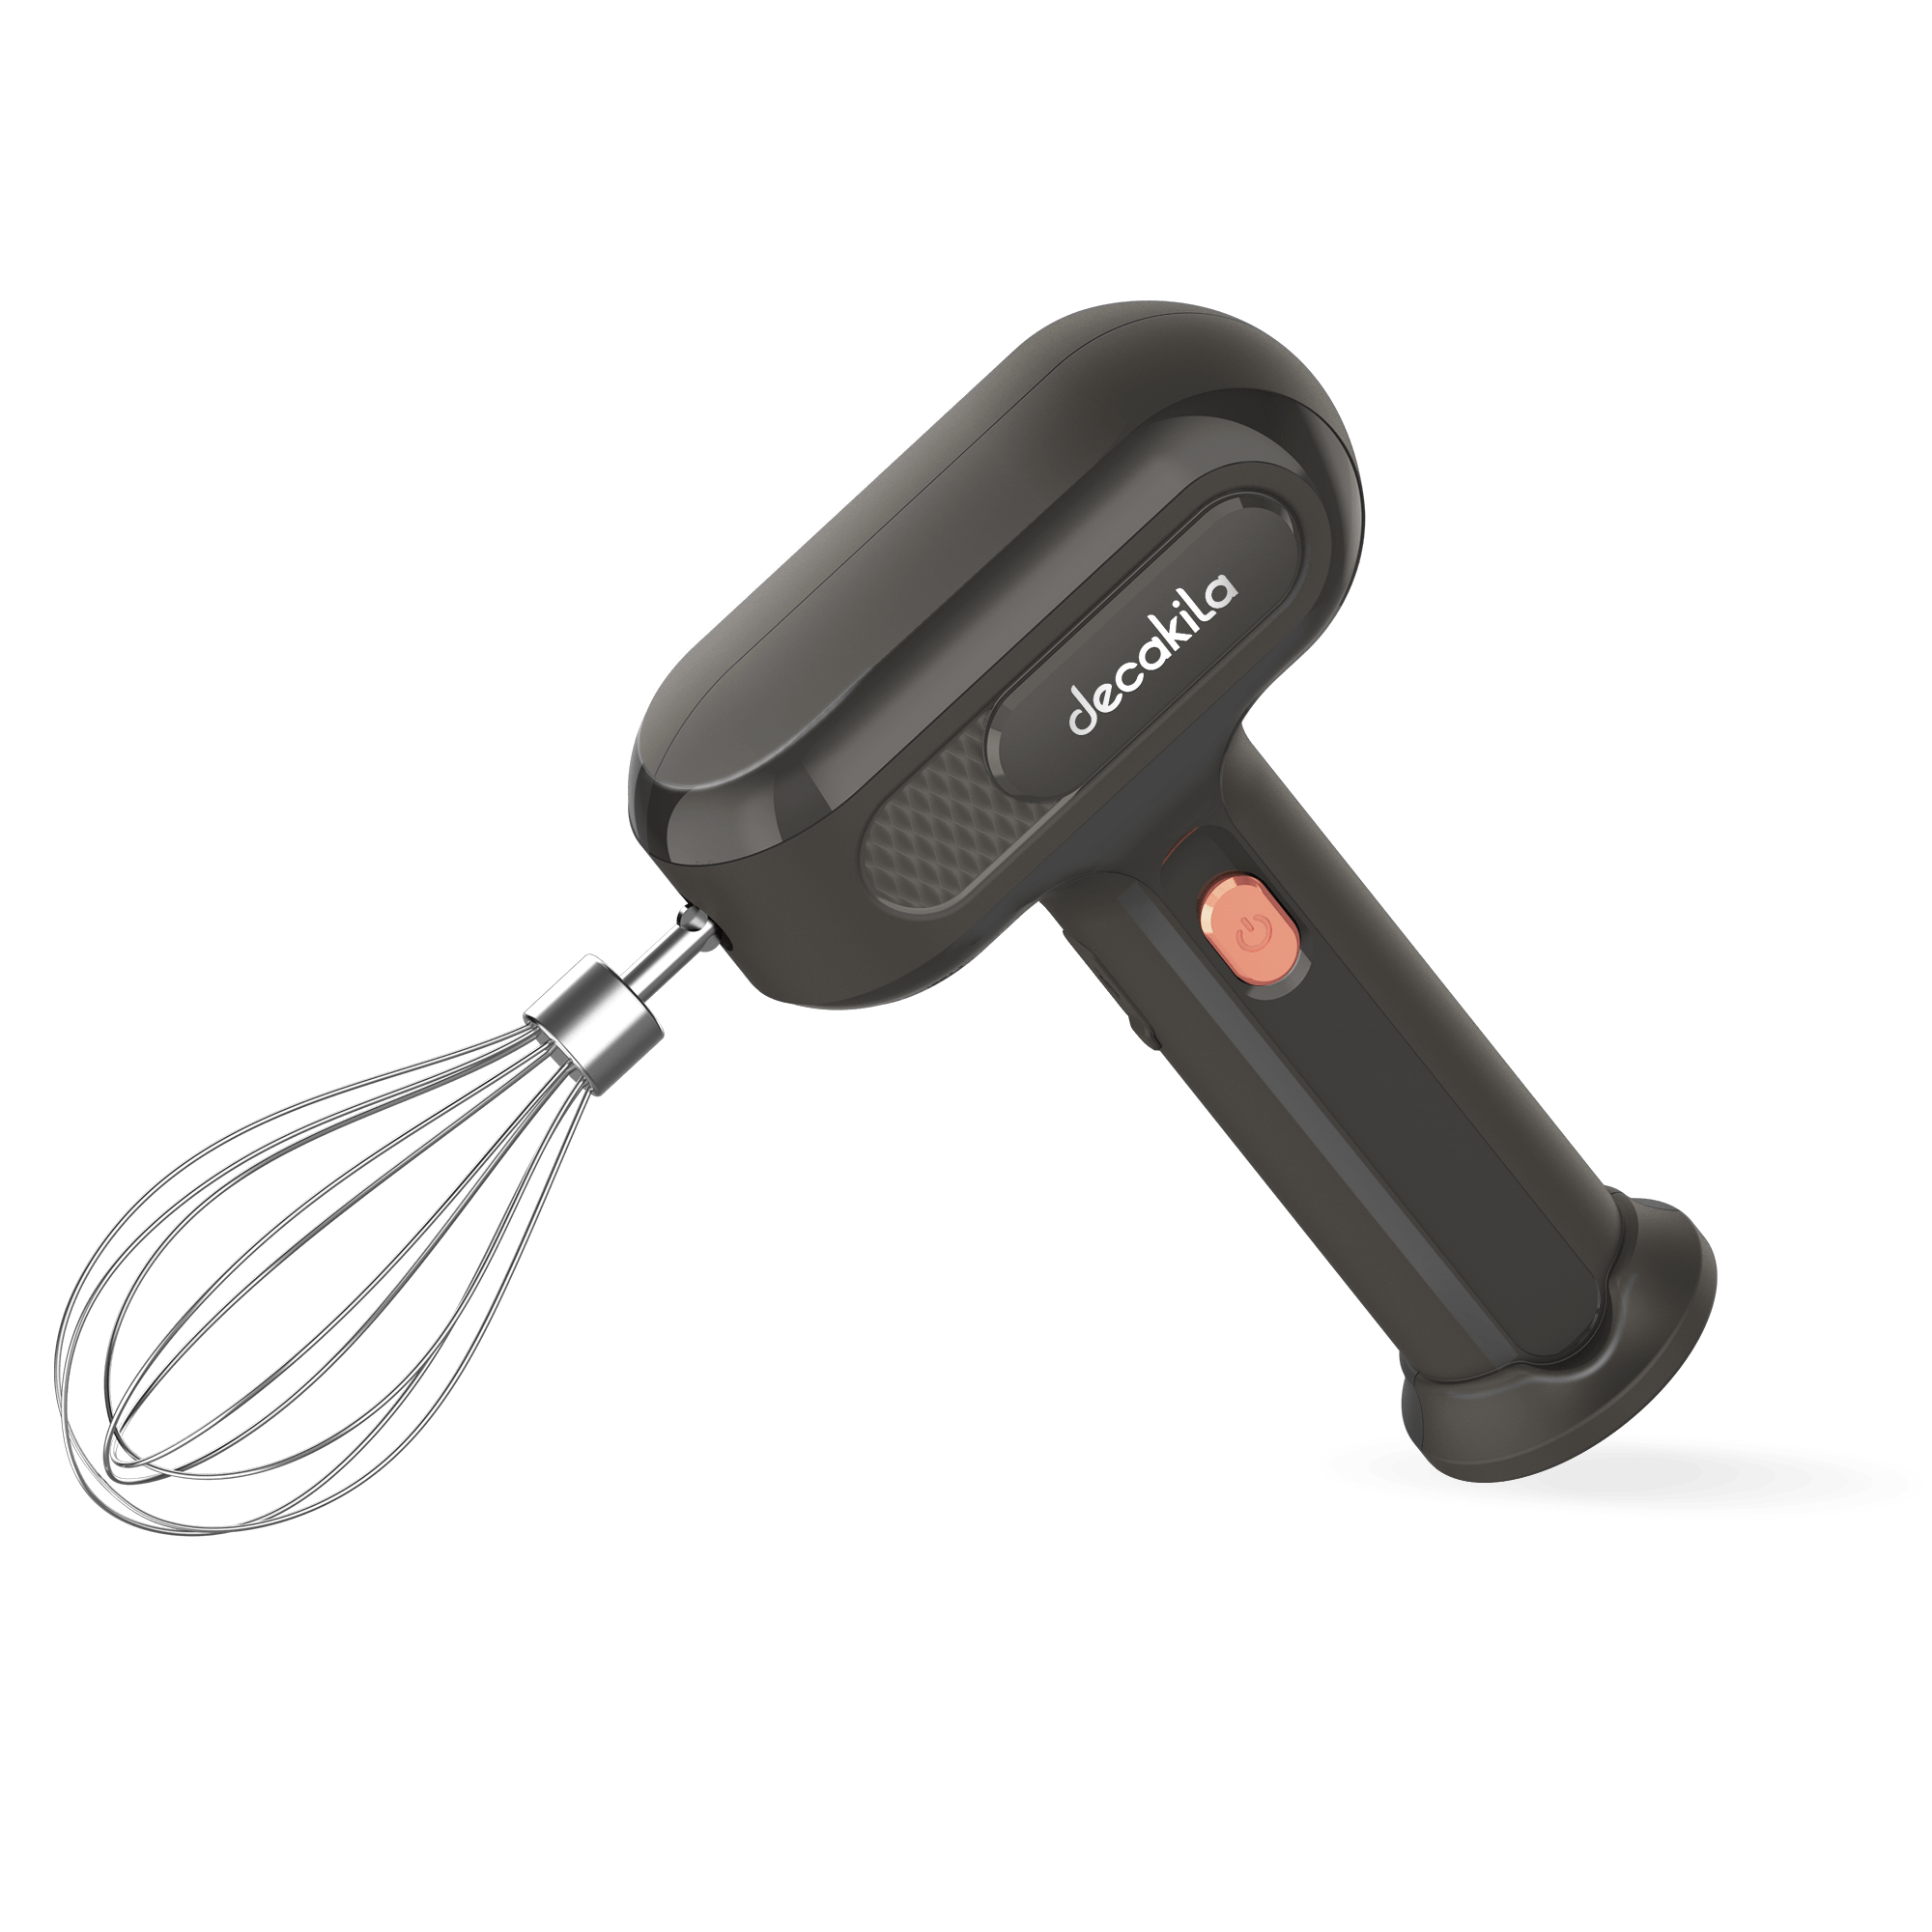 Decakila 3-Speed Cordless Hand Mixer 25W - KMMX018G & KMMX018W | Buy Online in Accra, Ghana - Supply Master Kitchen Appliances Buy Tools hardware Building materials